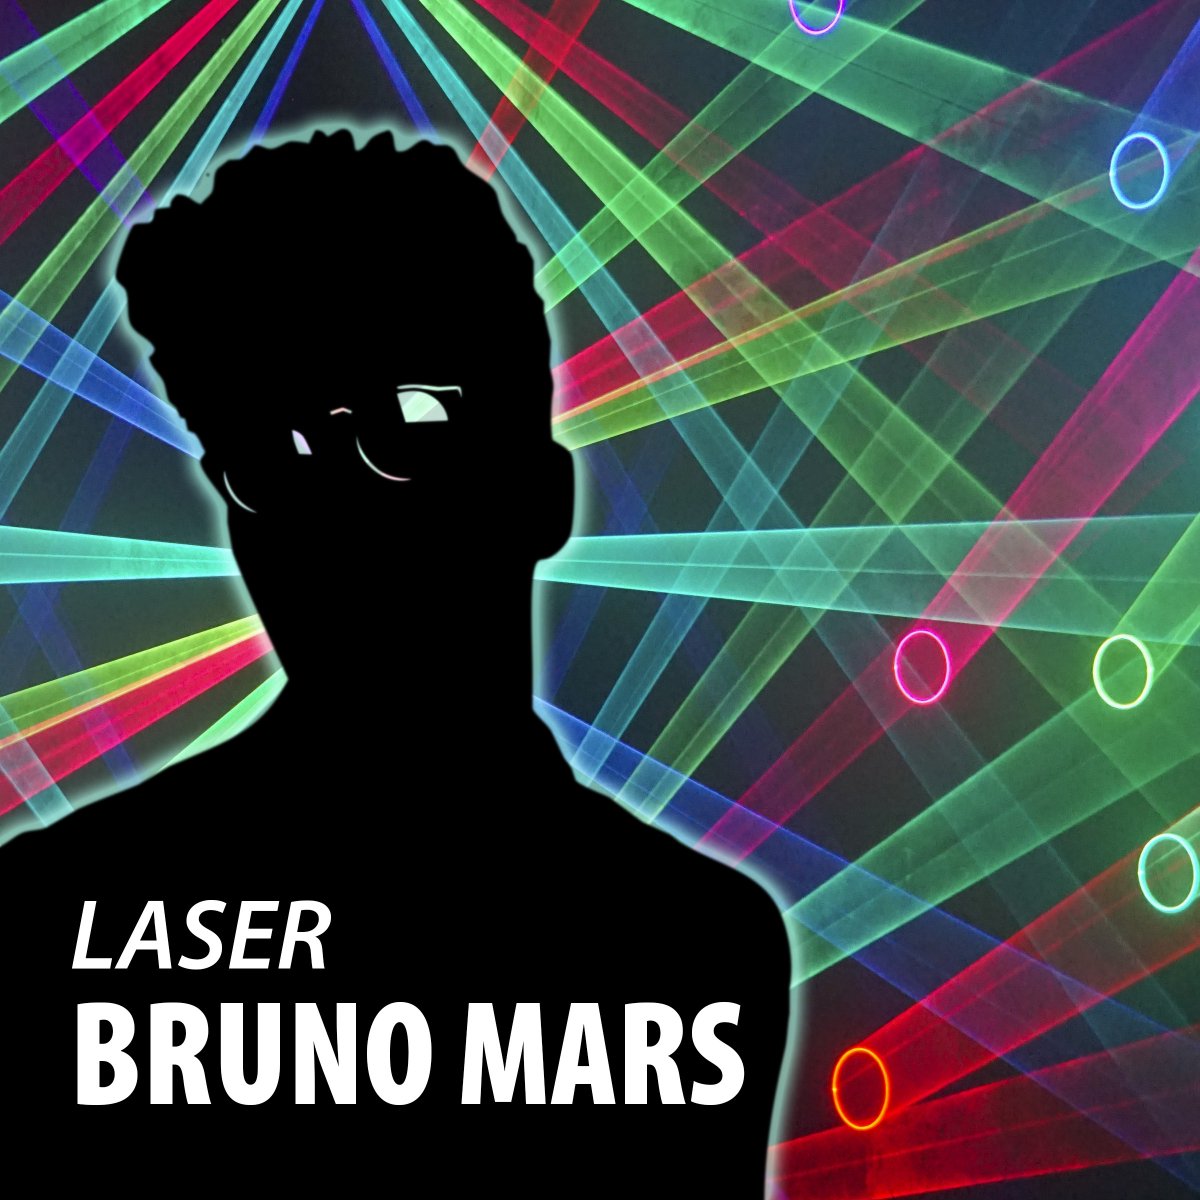 🎆 LASER BRUNO MARS 🎶 Bruno Mars has earned 15 Grammy Awards and 3 Guinness World Records. There's no doubt his chart-topping jams will get the Zeidler Dome buzzing on Friday and Saturday evenings this month! 🎟️👉 twose.ca/lasershows #yeg #yeggers #BrunoMars #MyTWOSE